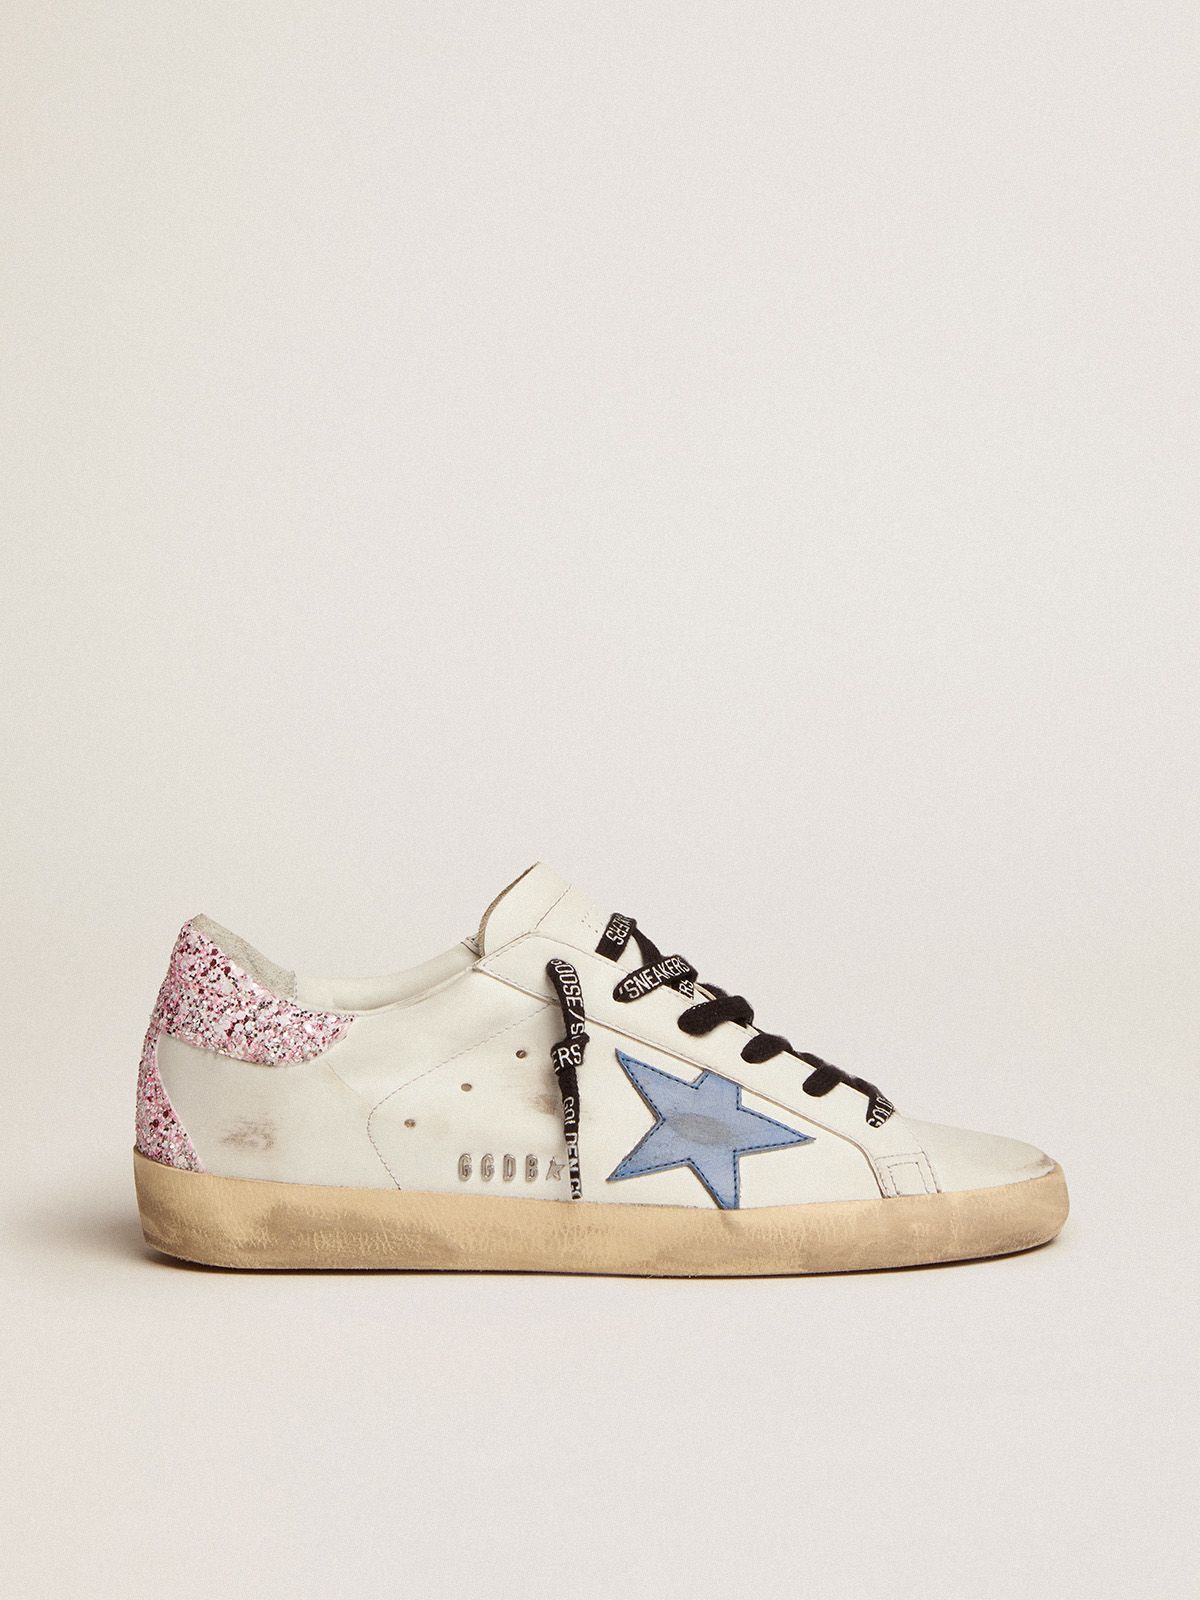 golden goose heel pink glitter sneakers star cobalt-blue leather tab with Super-Star and